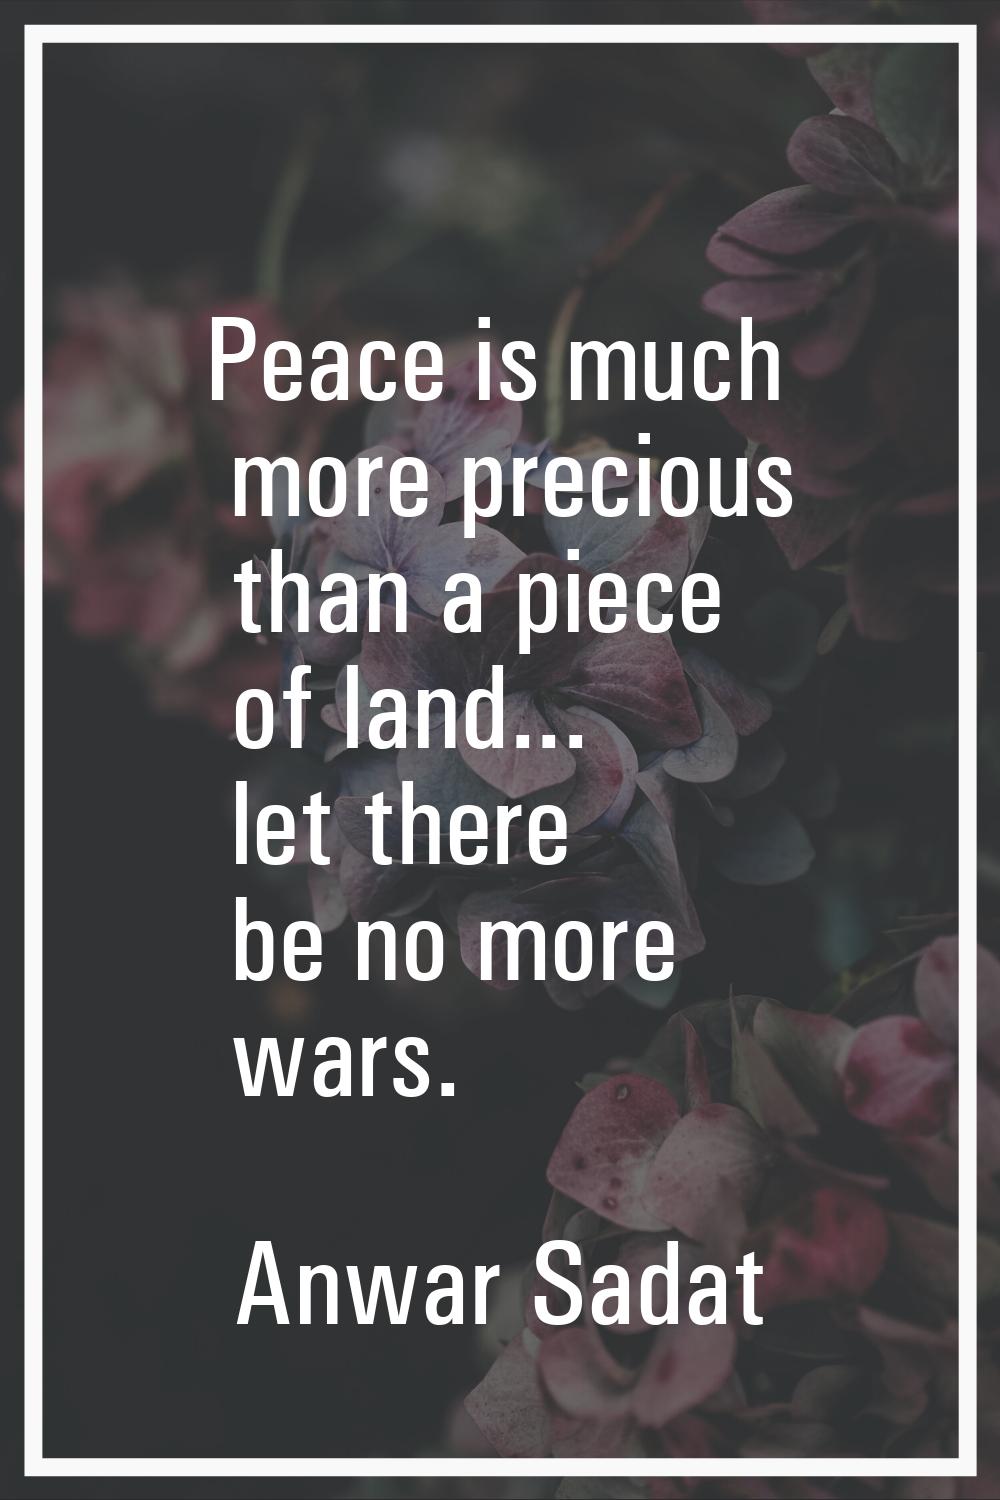 Peace is much more precious than a piece of land... let there be no more wars.